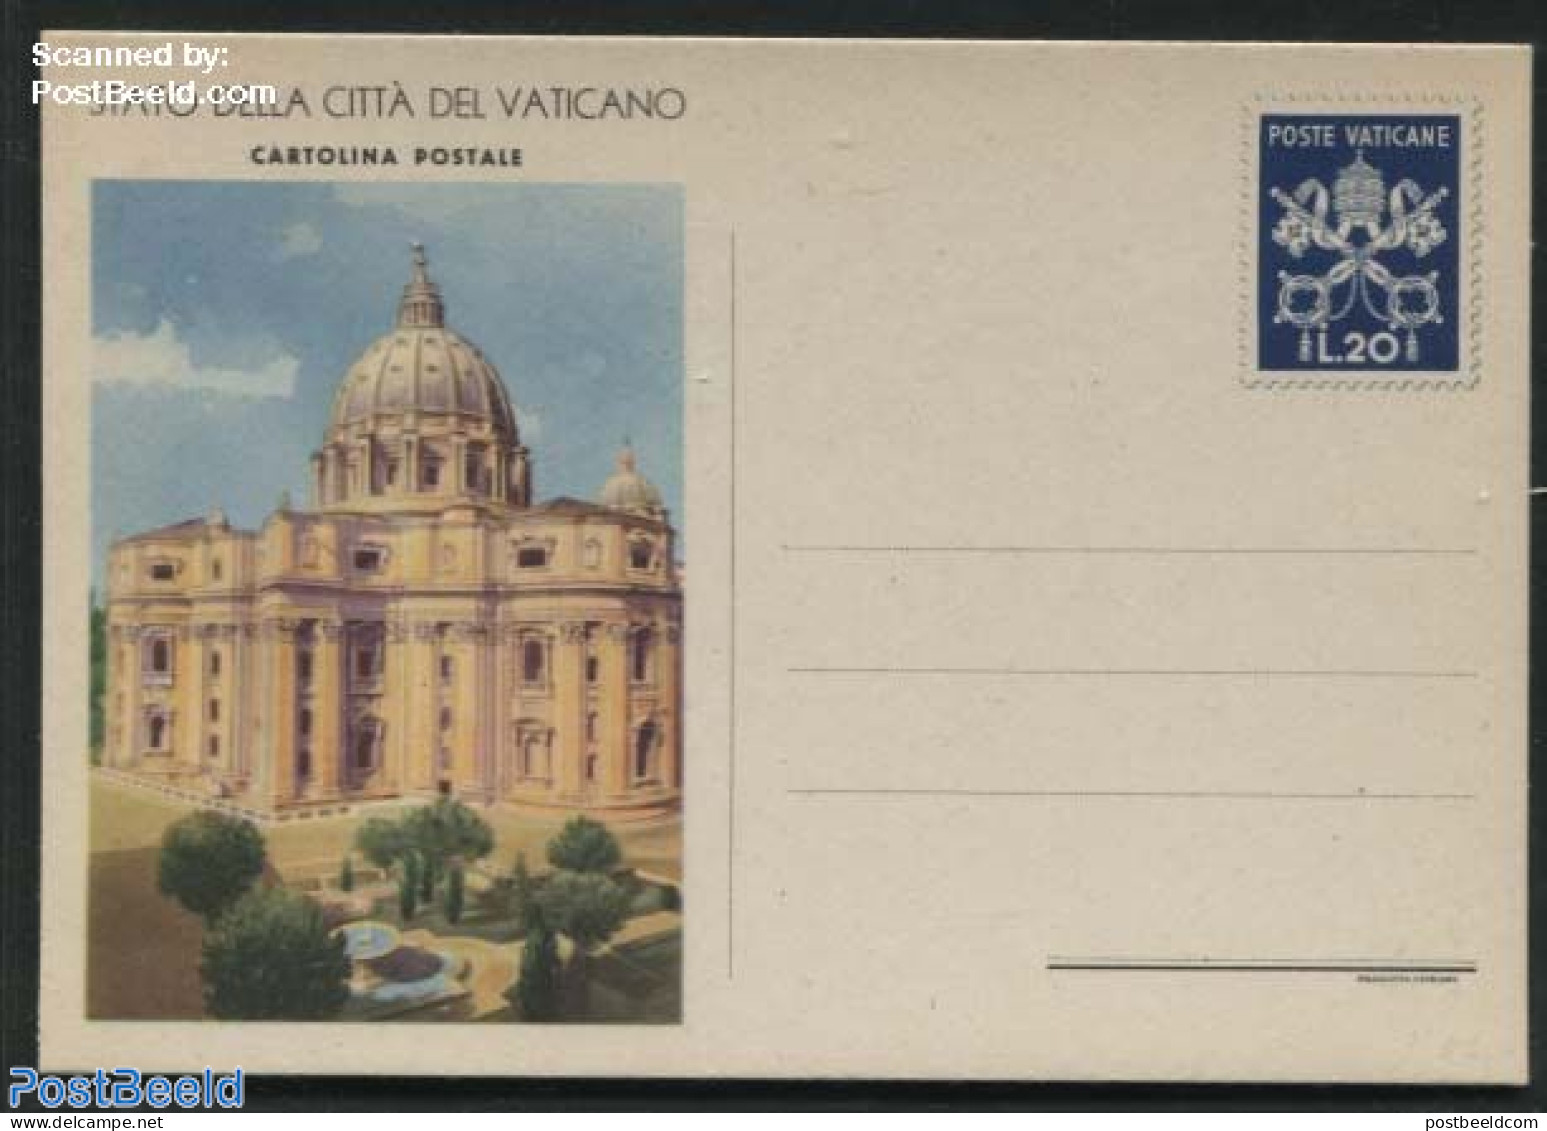 Vatican 1953 Postcard 20L, Dom And Garden, Unused Postal Stationary - Covers & Documents